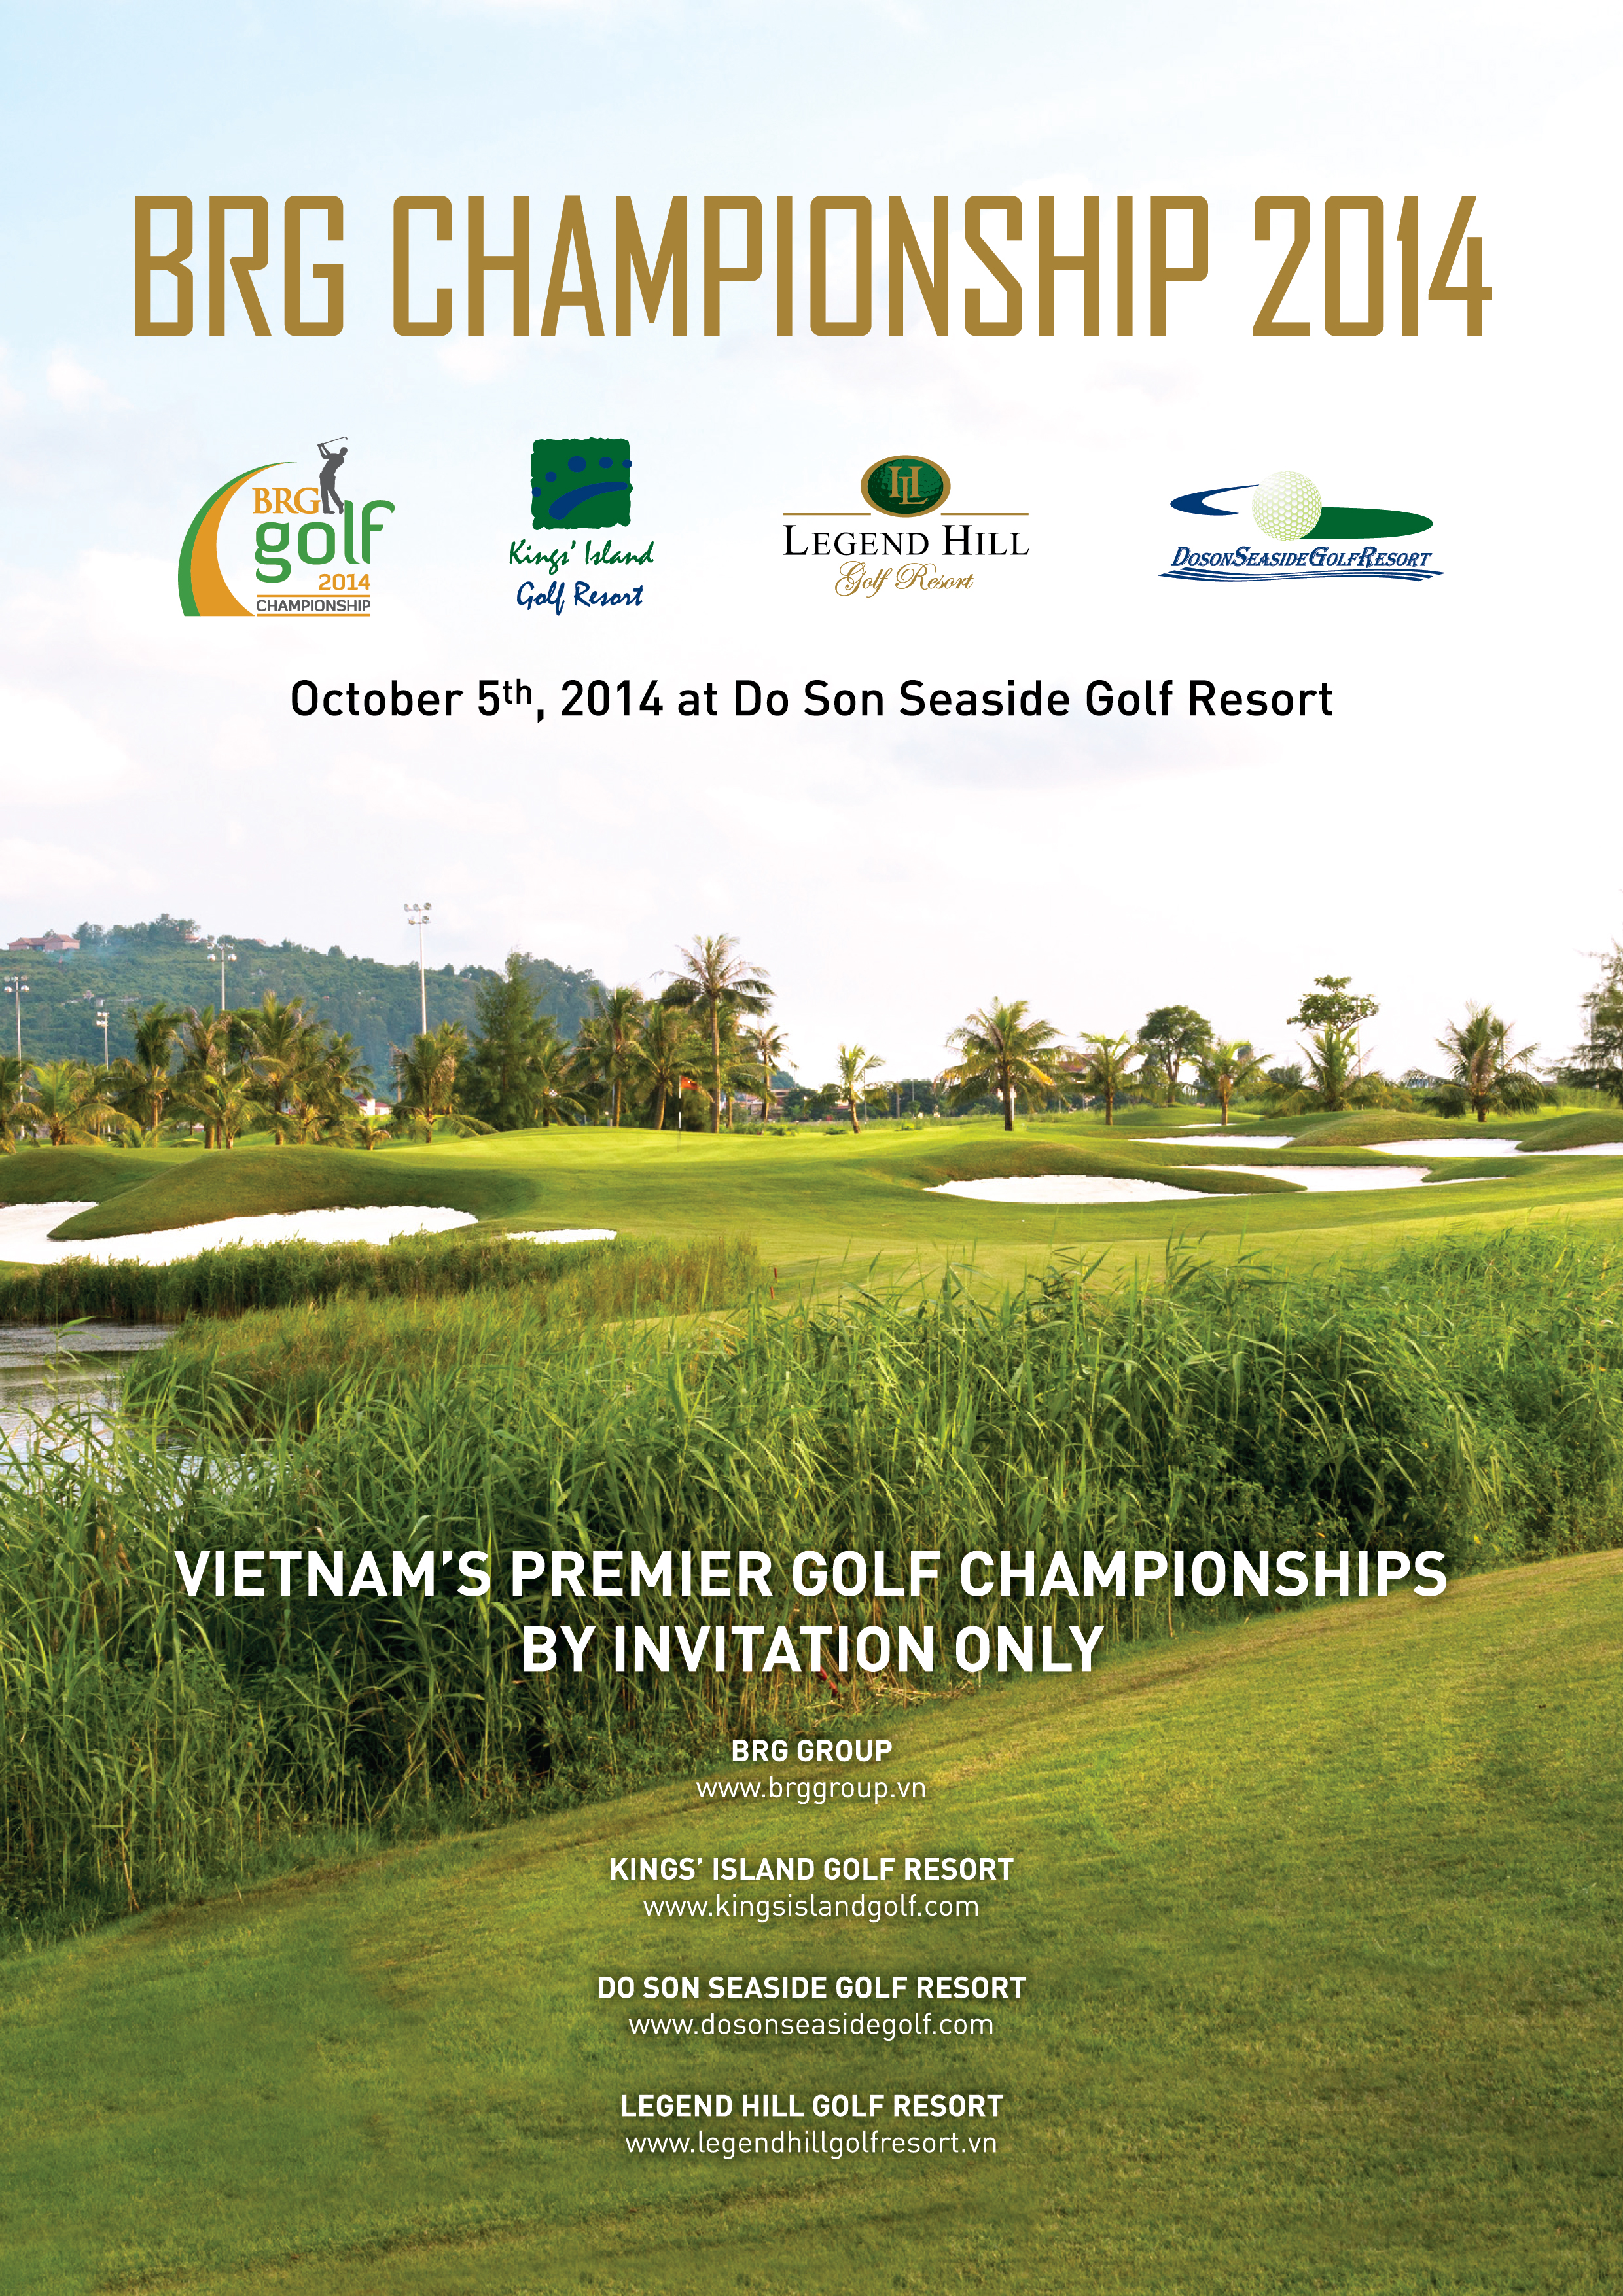 do son to host the third brg golf championships